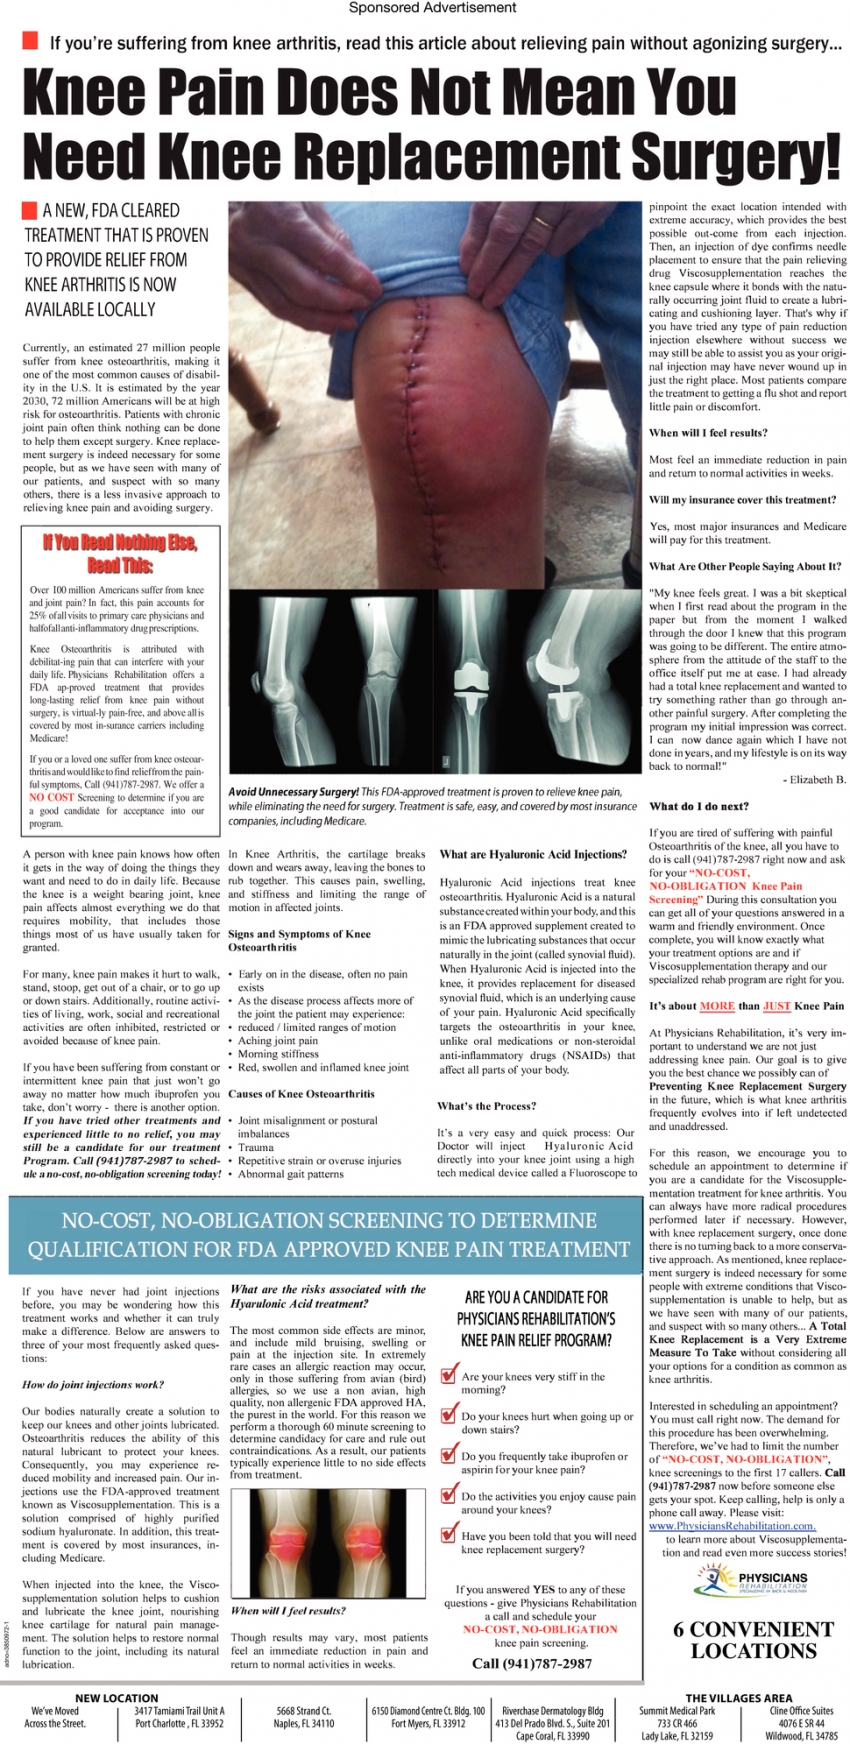 Knee Pain Does Not Mean You Need Knee Replacement Surgery